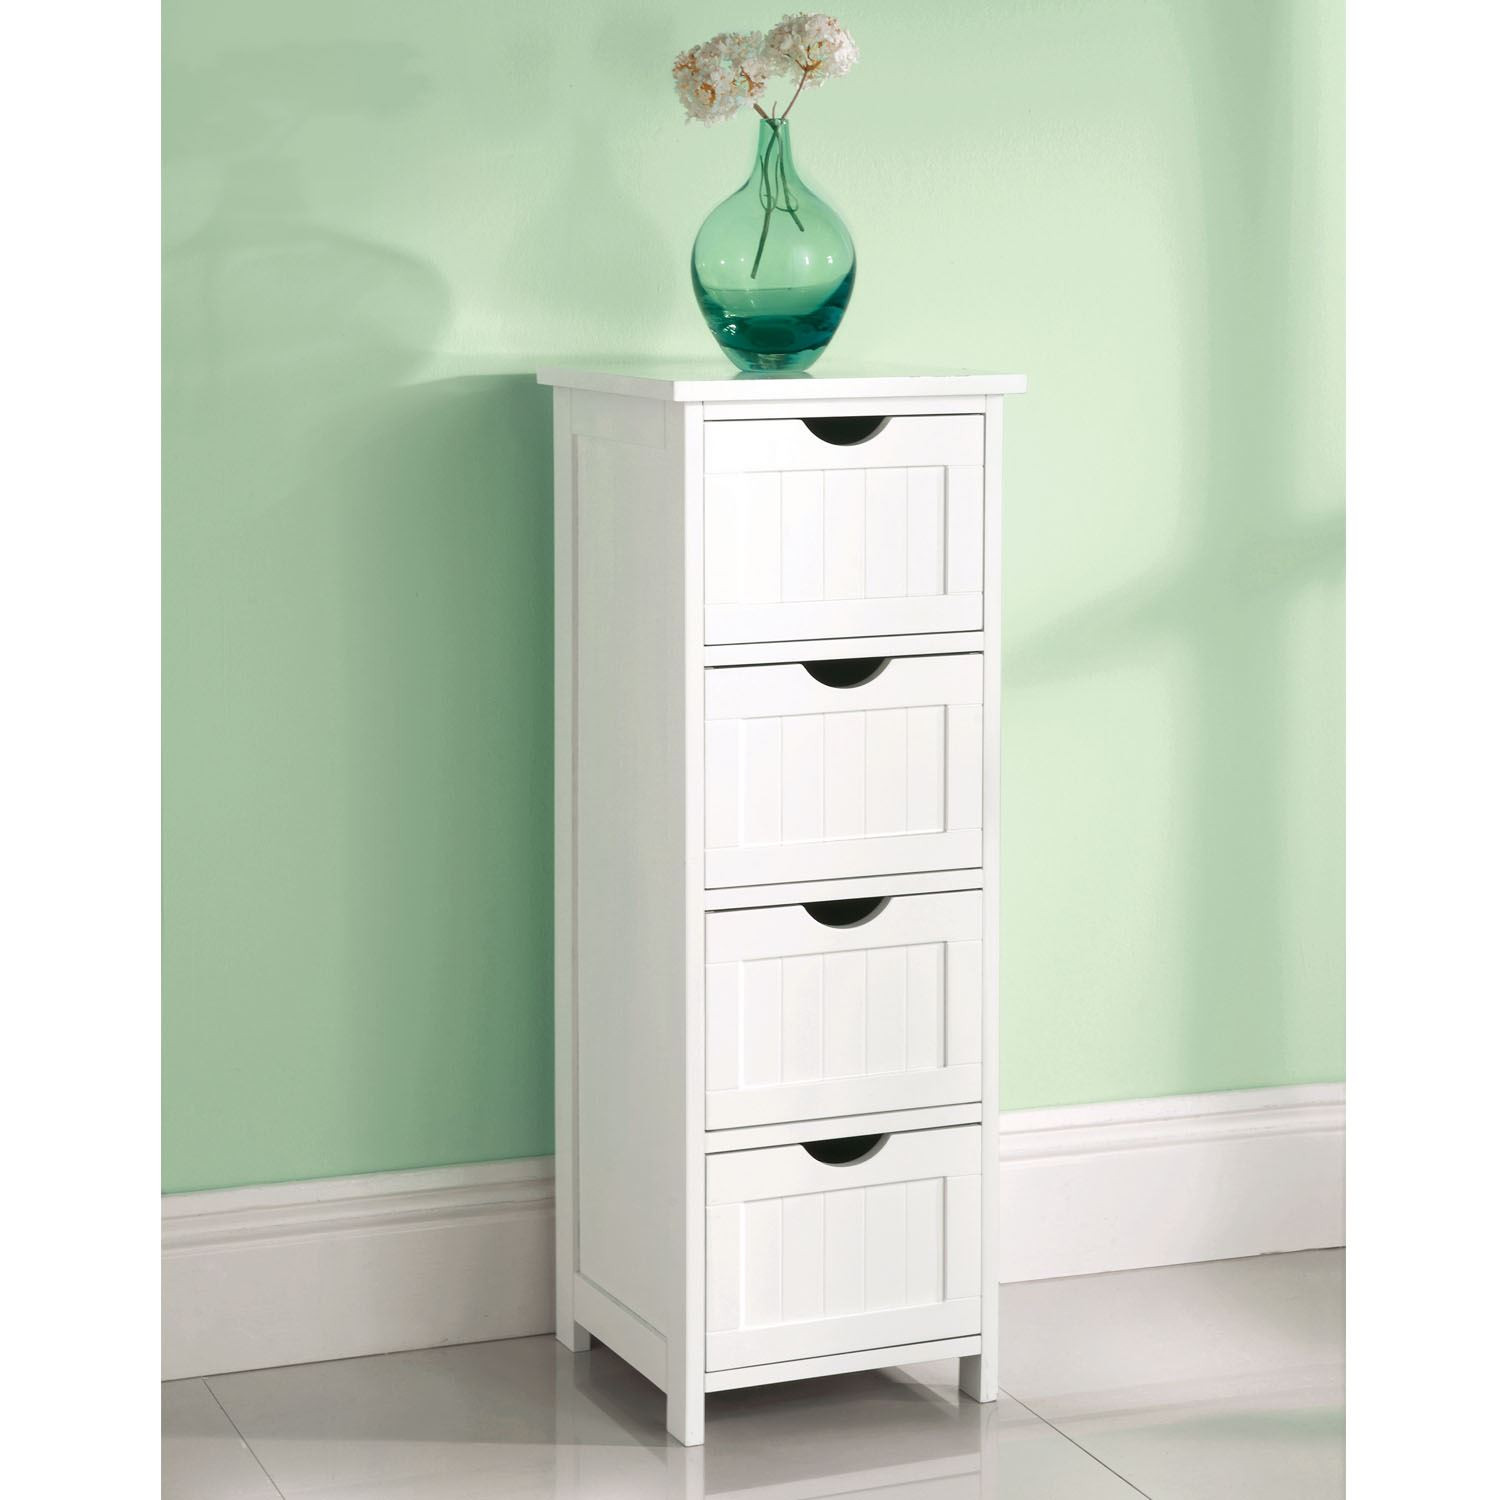 Bathroom Storage Cabinet With Drawers
 White Wooden 4 Drawer Free Standing Bathroom Cabinet